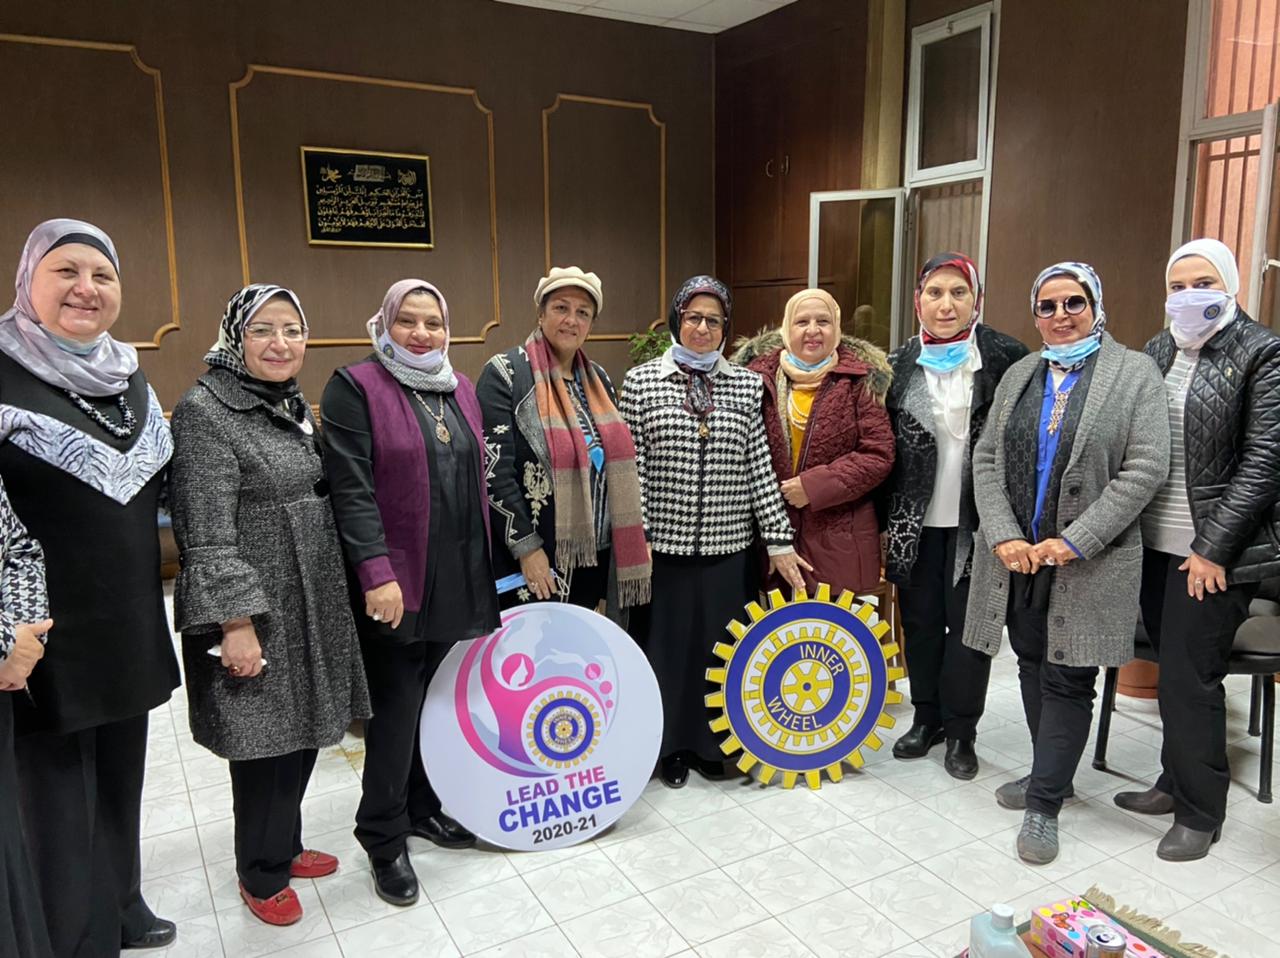 IWC of Al Mansoura members Visited the Association of Friends of University Children's hospital